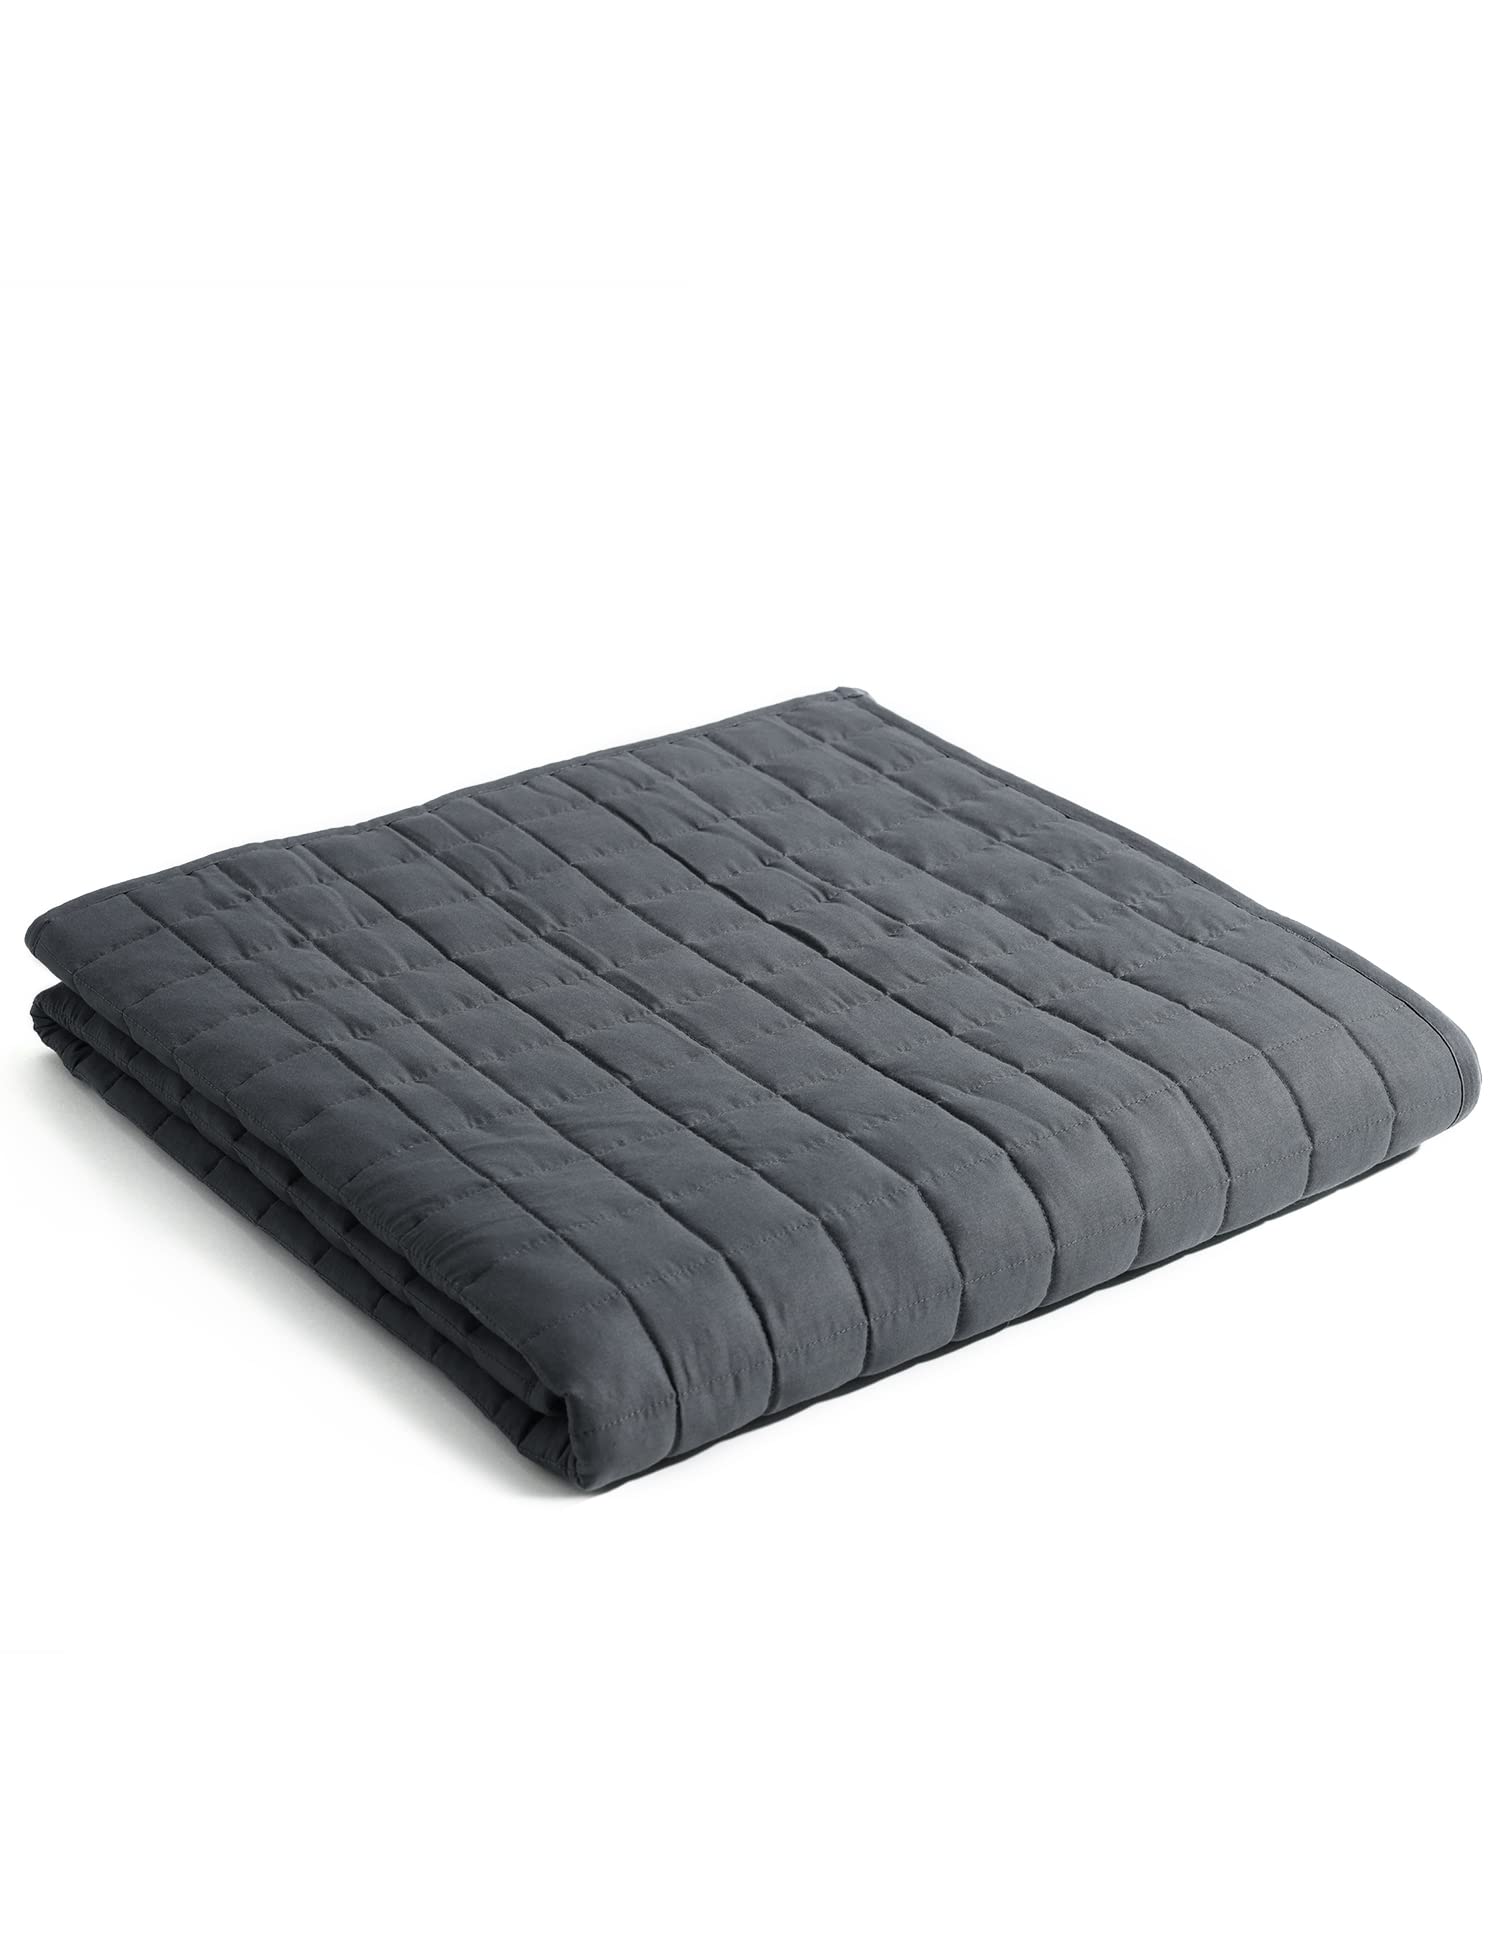 Book Cover YnM Exclusive 15lbs Weighted Blanket, Smallest Compartments with Glass Beads, Bed Blanket for One Person of 140lbs, Ideal for Twin or Full Bed (48x72 Inches, 15 Pounds, Dark Grey) 48 in x 72 in 15 lb Dark Grey丨microfiber丨exclusive